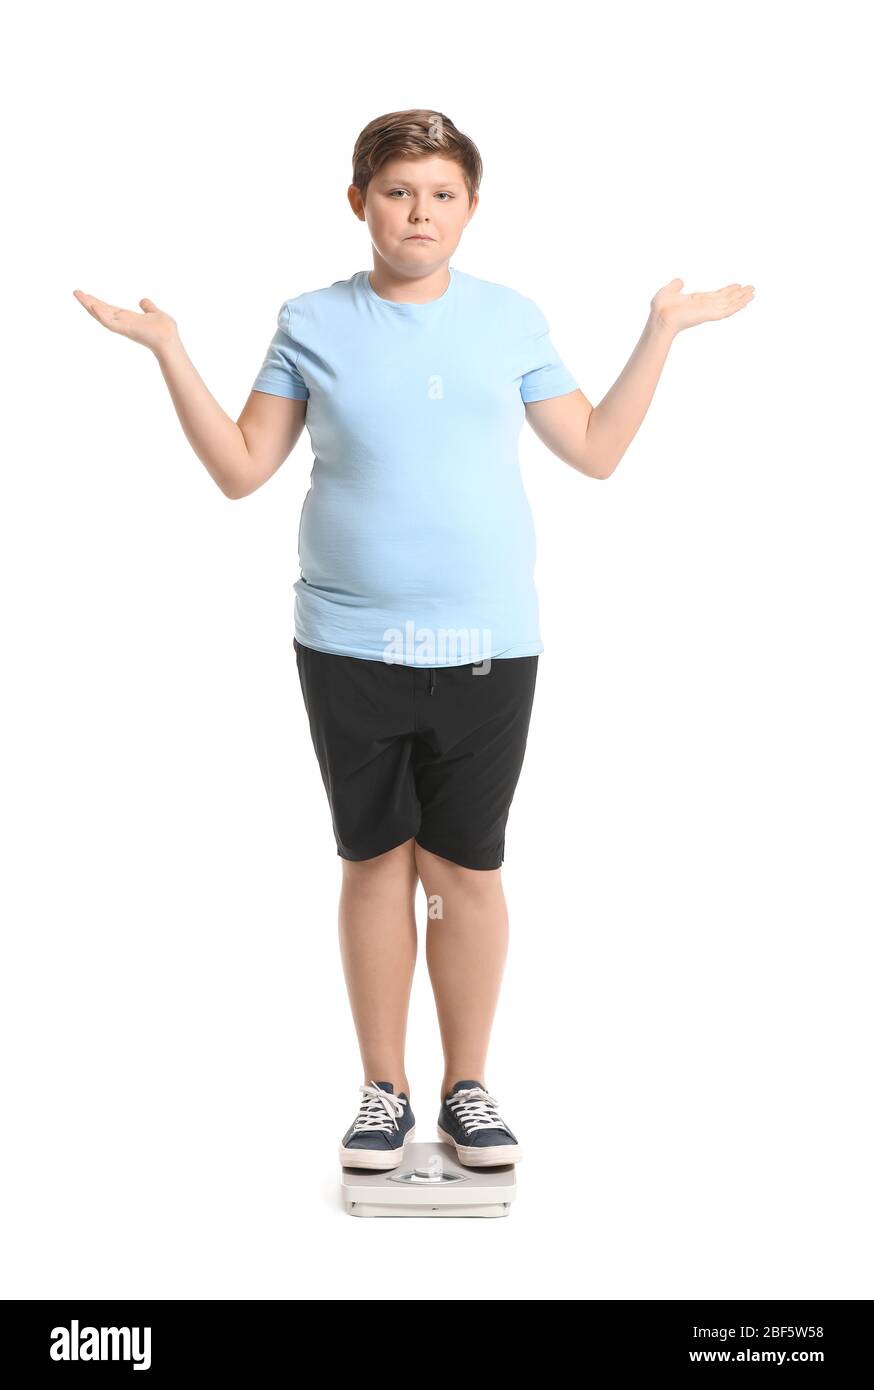 Overweight boy standing on scales against white background Stock Photo